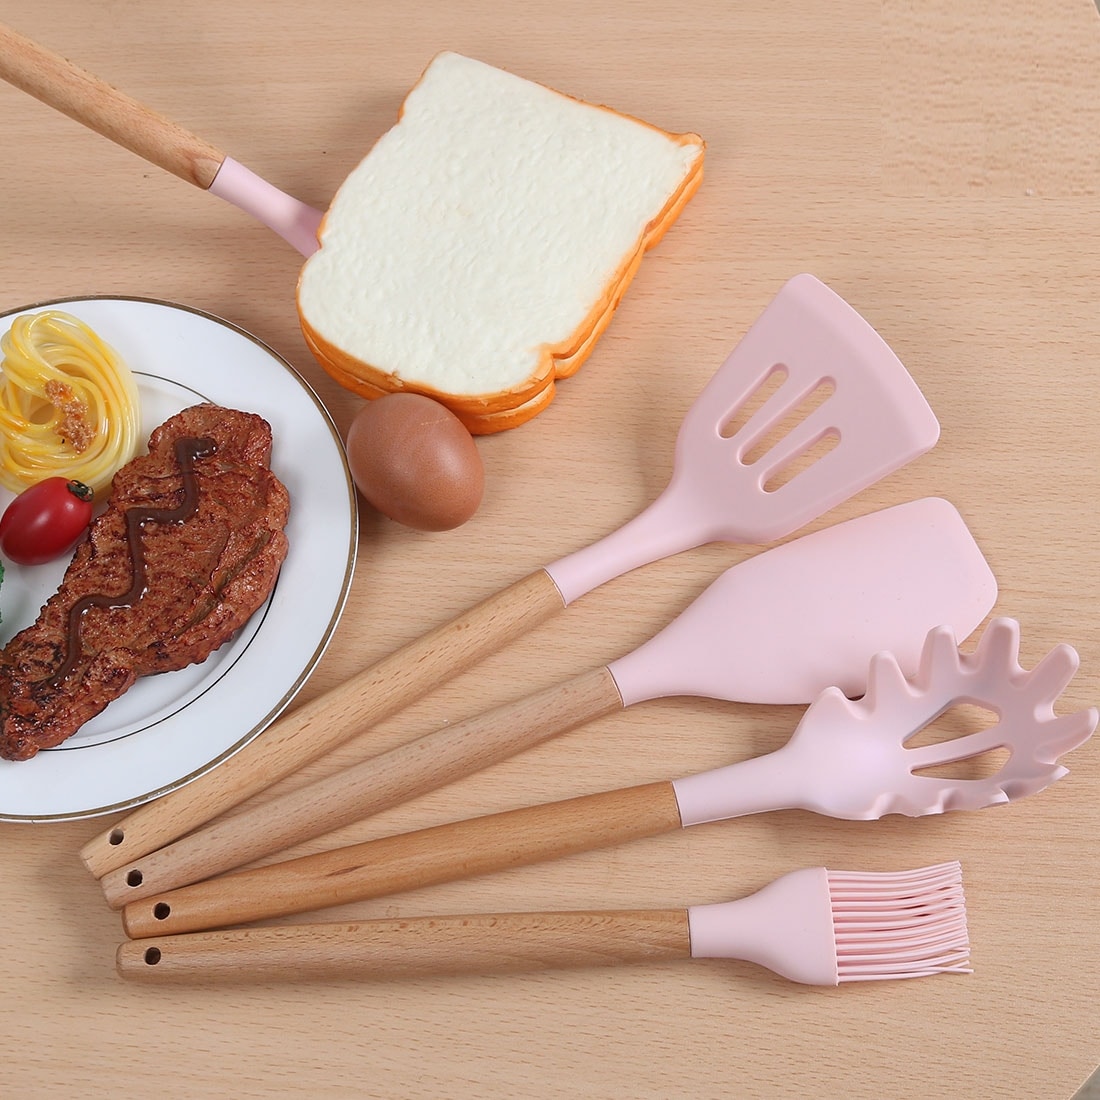 https://ak1.ostkcdn.com/images/products/is/images/direct/d790558eeb3f8b4e5162dbff7829940e2ce2dac5/5pcs-Silicone-Spatula-Set-Heat-Resistant-Non-scratch-Kitchen-Cooking.jpg